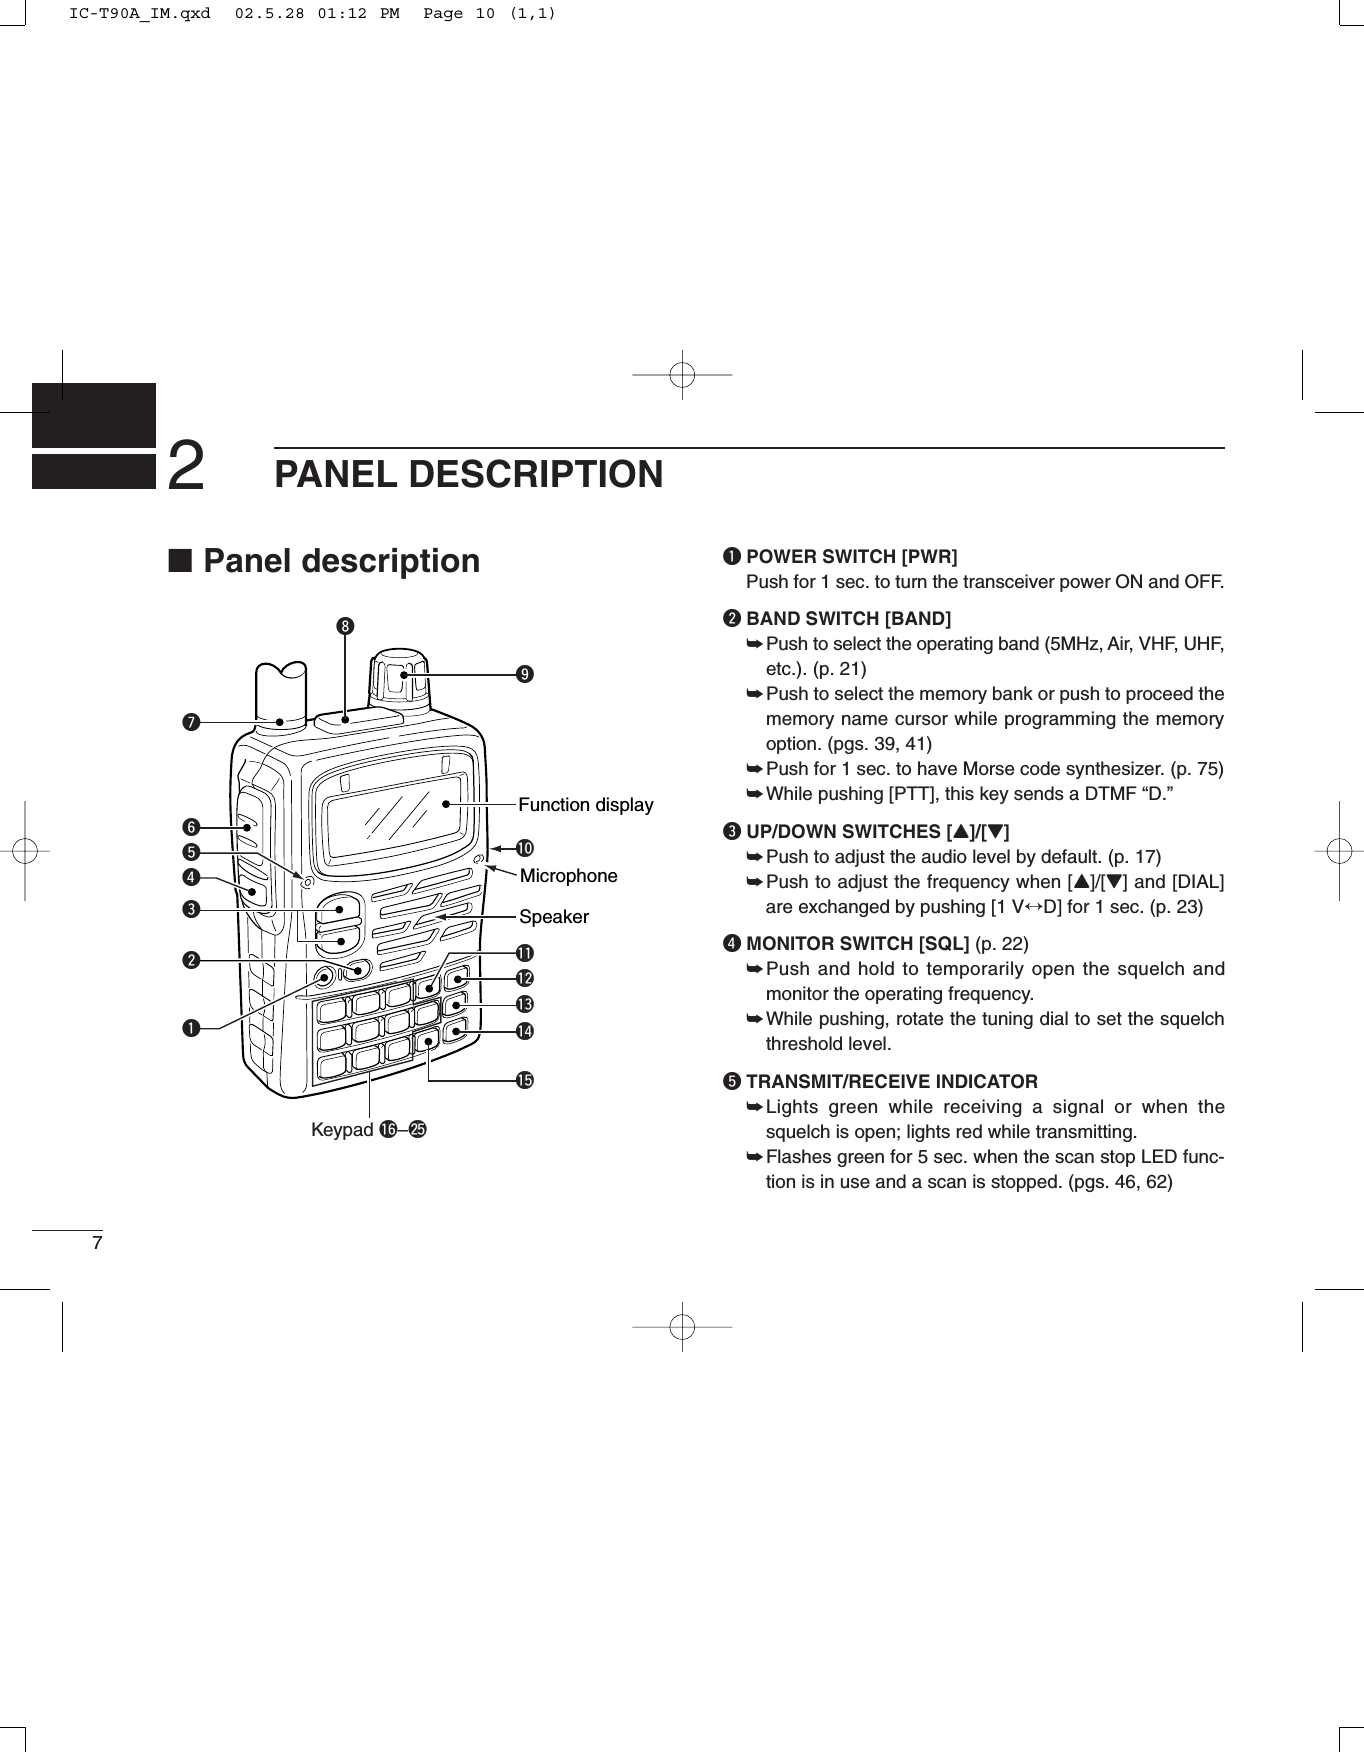 ■Panel description qPOWER SWITCH [PWR]Push for 1 sec. to turn the transceiver power ON and OFF.wBAND SWITCH [BAND]➥Push to select the operating band (5MHz, Air, VHF, UHF,etc.). (p. 21)➥Push to select the memory bank or push to proceed thememory name cursor while programming the memoryoption. (pgs. 39, 41)➥Push for 1 sec. to have Morse code synthesizer. (p. 75)➥While pushing [PTT], this key sends a DTMF “D.”eUP/DOWN SWITCHES [Y]/[Z]➥Push to adjust the audio level by default. (p. 17)➥Push to adjust the frequency when [Y]/[Z] and [DIAL]are exchanged by pushing [1 V↔D] for 1 sec. (p. 23)rMONITOR SWITCH [SQL] (p. 22)➥Push and hold to temporarily open the squelch andmonitor the operating frequency.➥While pushing, rotate the tuning dial to set the squelchthreshold level.tTRANSMIT/RECEIVE INDICATOR➥Lights green while receiving a signal or when thesquelch is open; lights red while transmitting.➥Flashes green for 5 sec. when the scan stop LED func-tion is in use and a scan is stopped. (pgs. 46, 62)tuio!0!1!2!3!4Keypad !6–@5!5erqwyFunction displaySpeakerMicrophone72PANEL DESCRIPTIONIC-T90A_IM.qxd  02.5.28 01:12 PM  Page 10 (1,1)